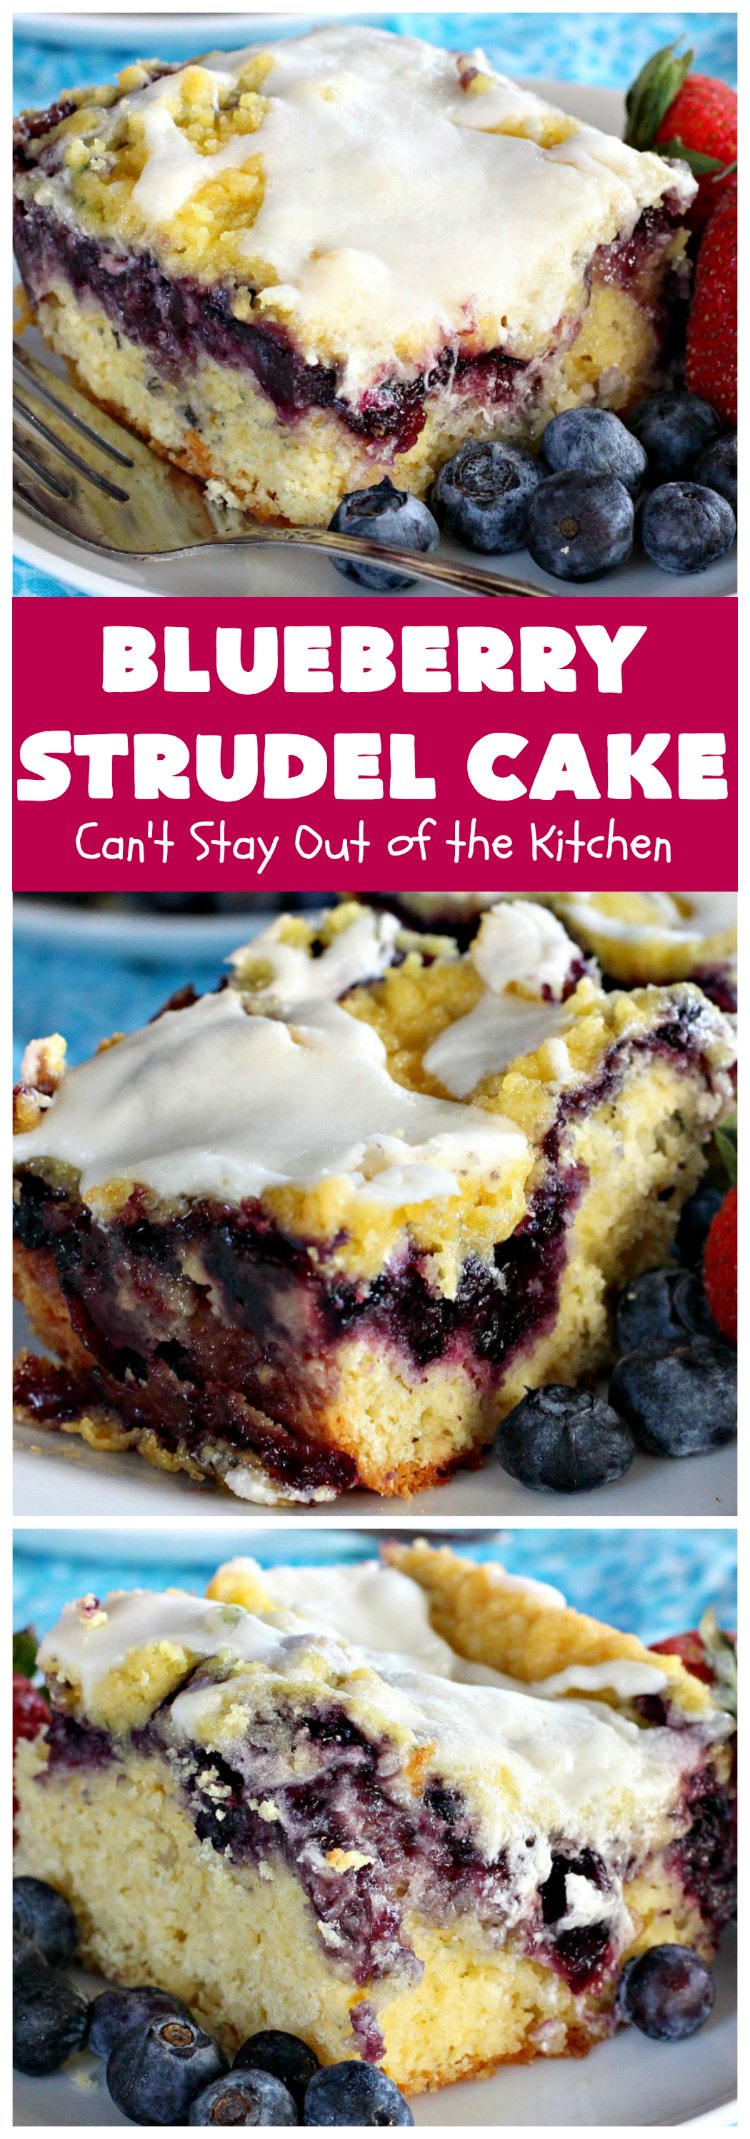 Blueberry Strudel Cake | Can't Stay Out of the Kitchen